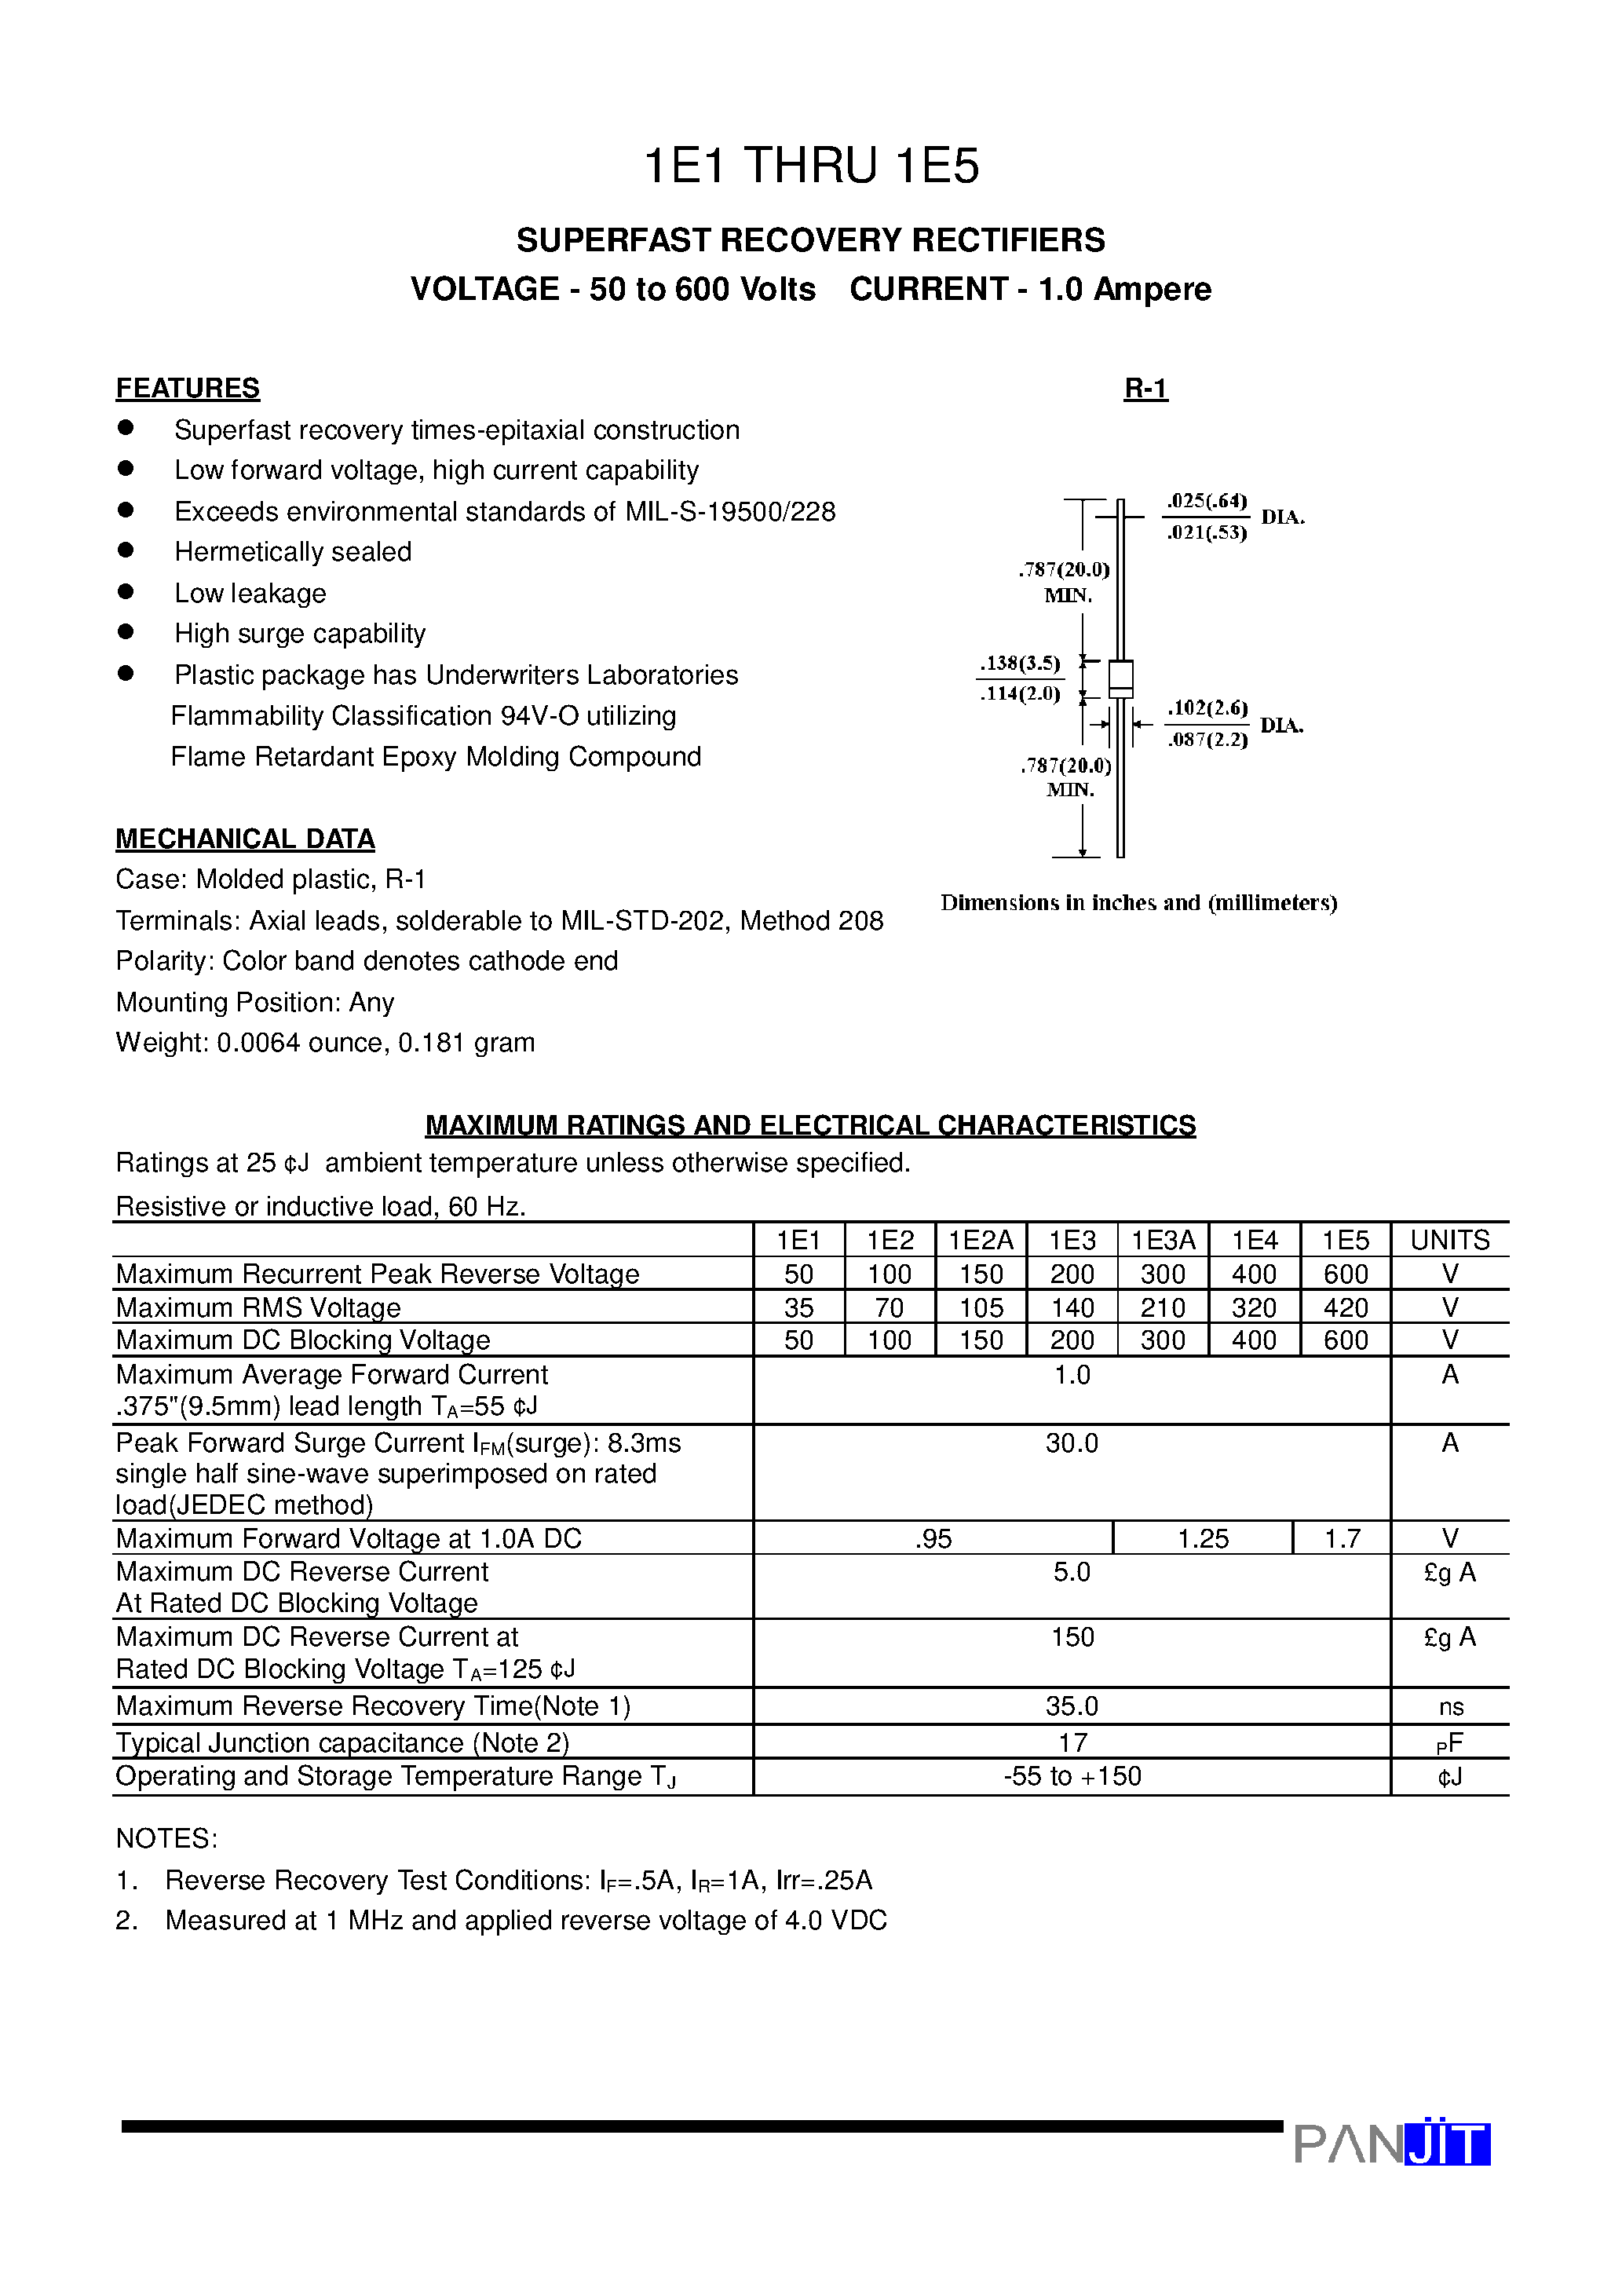 Datasheet 1.00E+04 - SUPERFAST RECOVERY RECTIFIERS(VOLTAGE - 50 to 600 Volts CURRENT - 1.0 Ampere) page 1